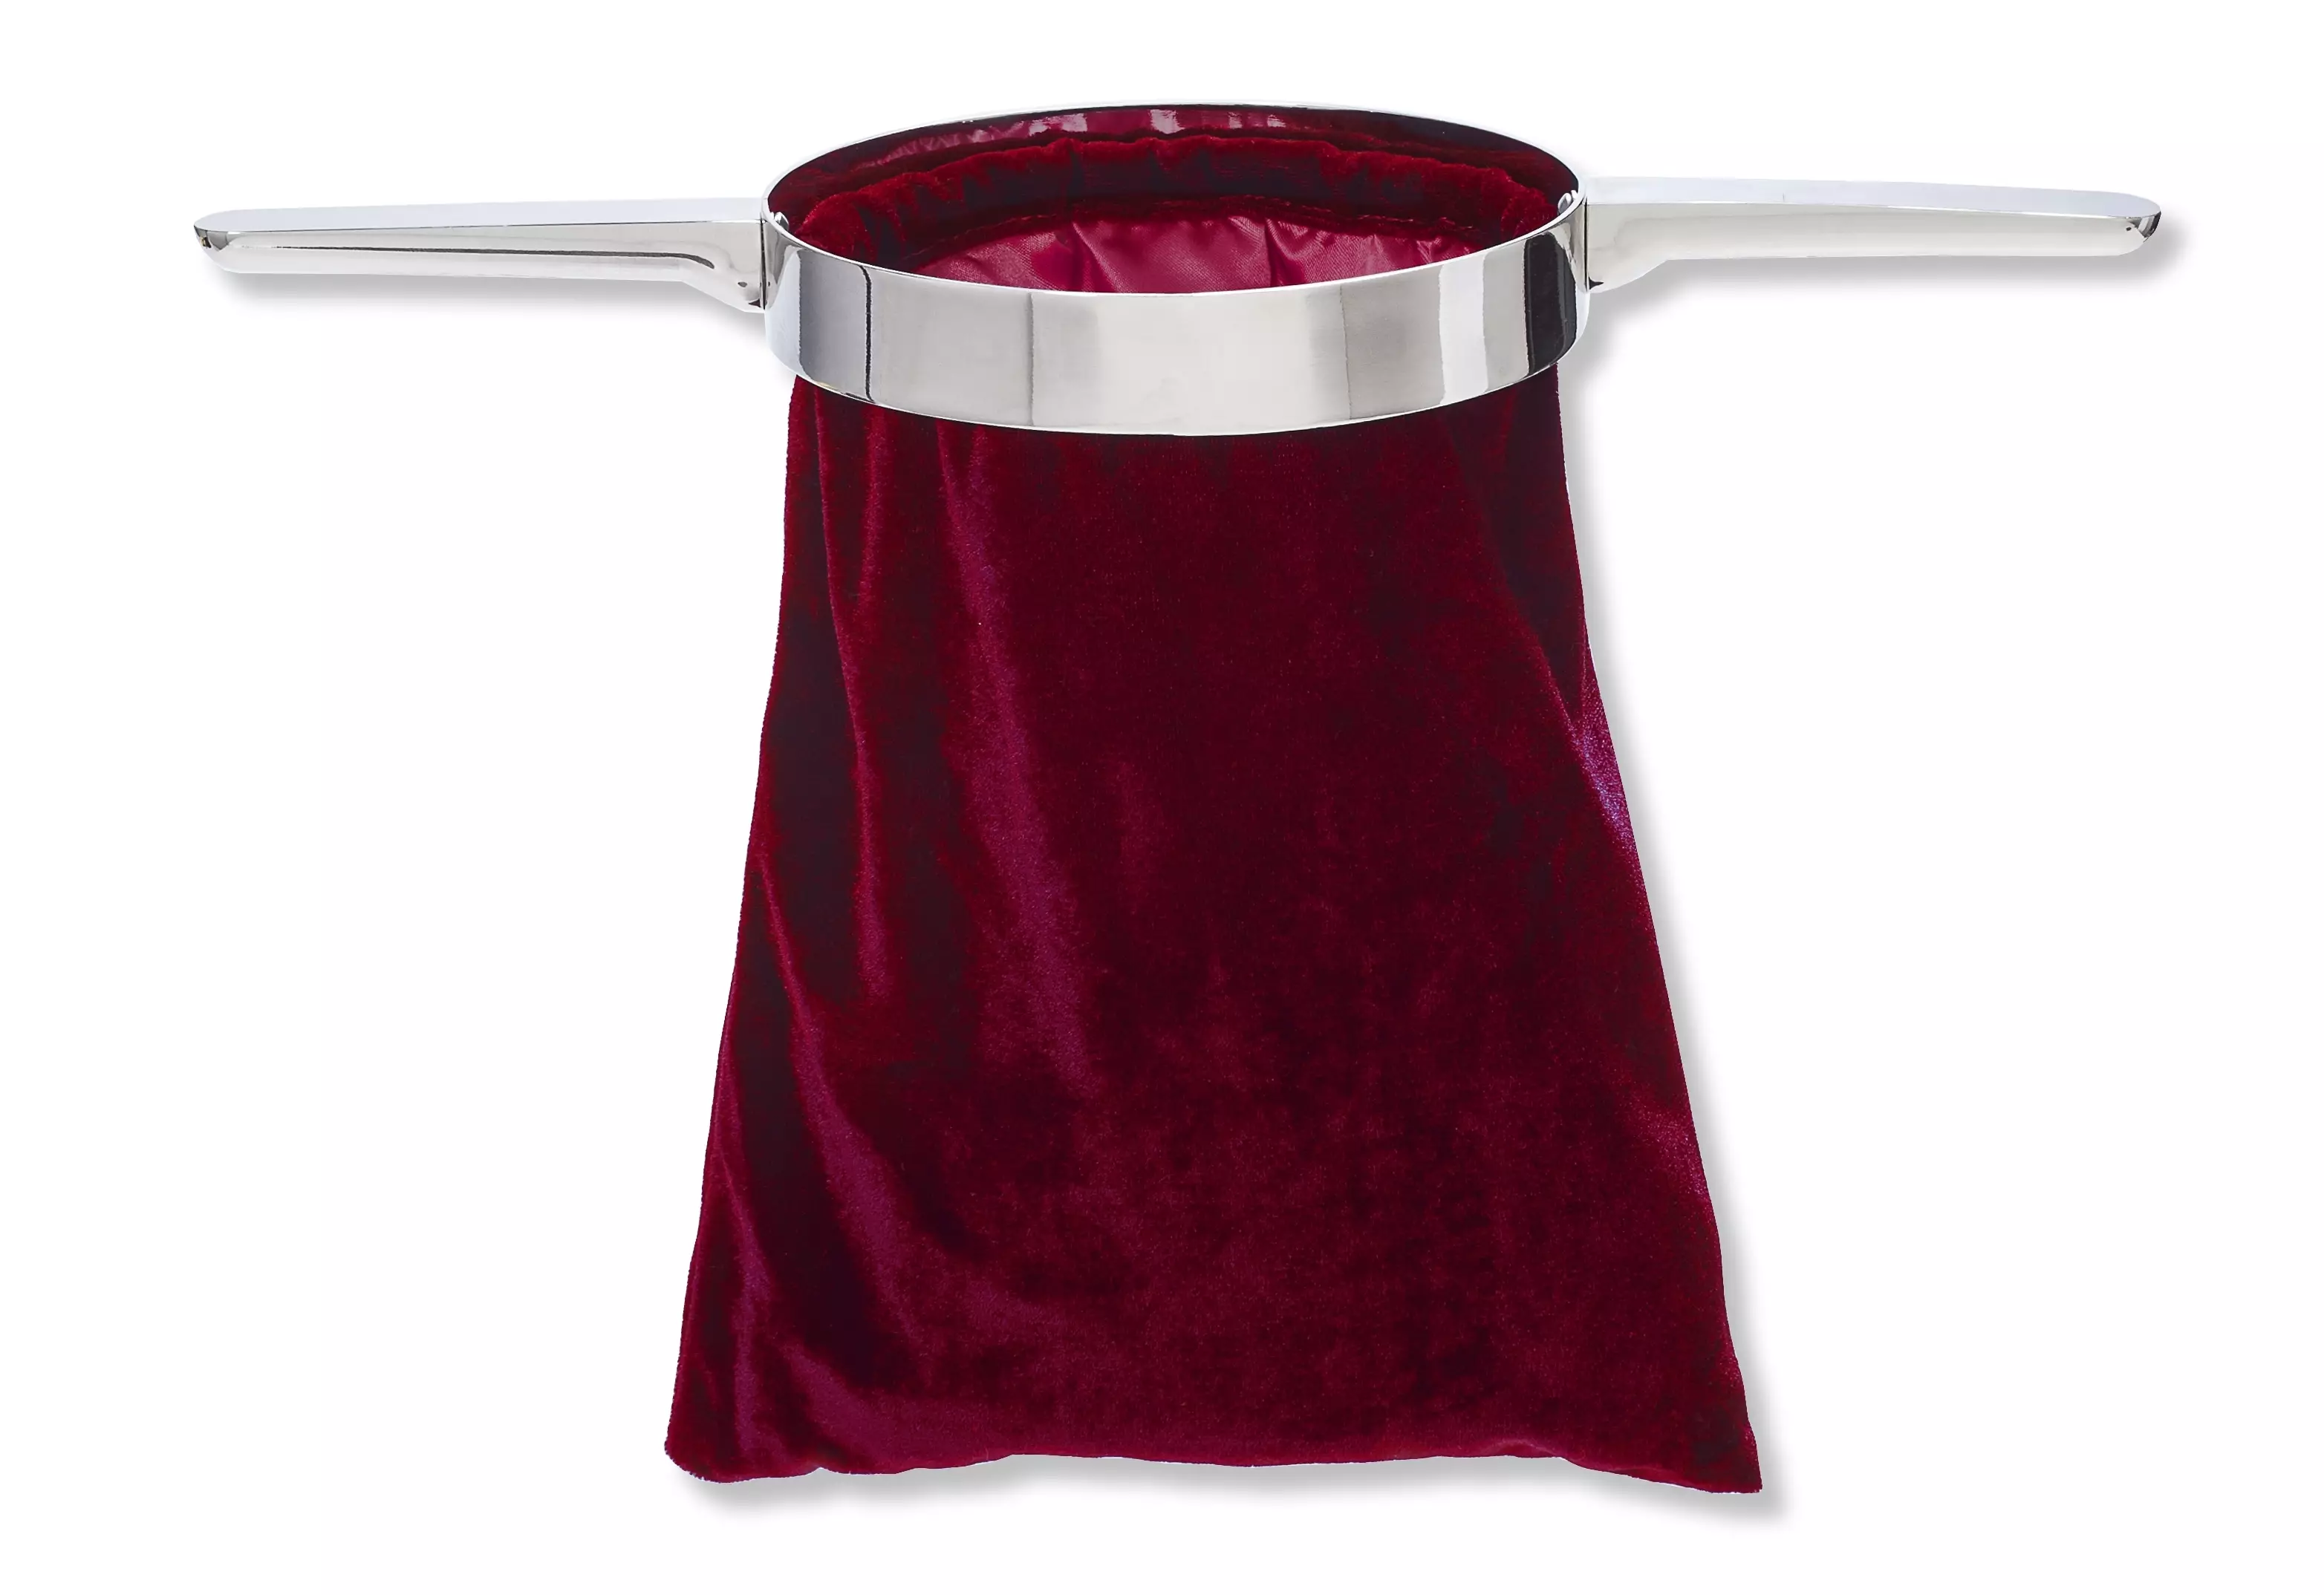 Offering Bag with Handle - Red Cloth